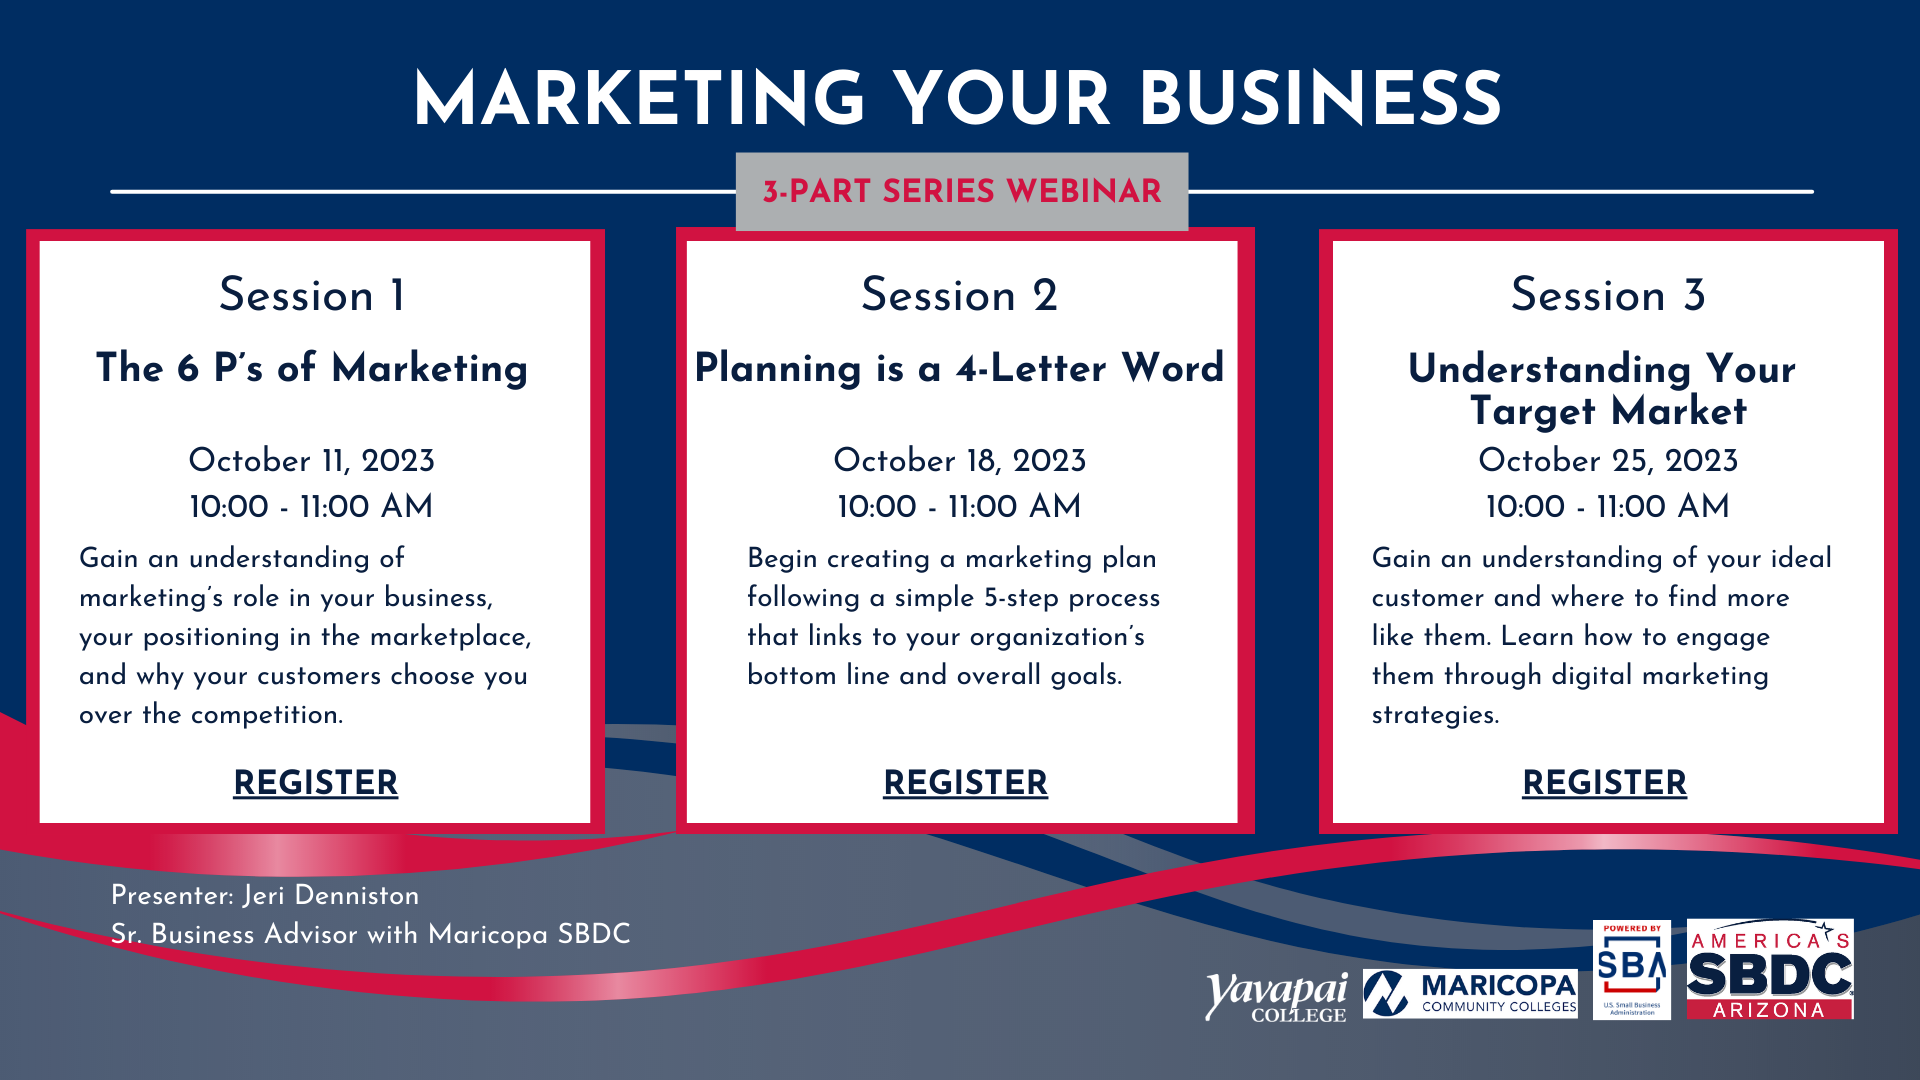 Marketing Your Business - Session 2: Planning is a 4-Letter Word